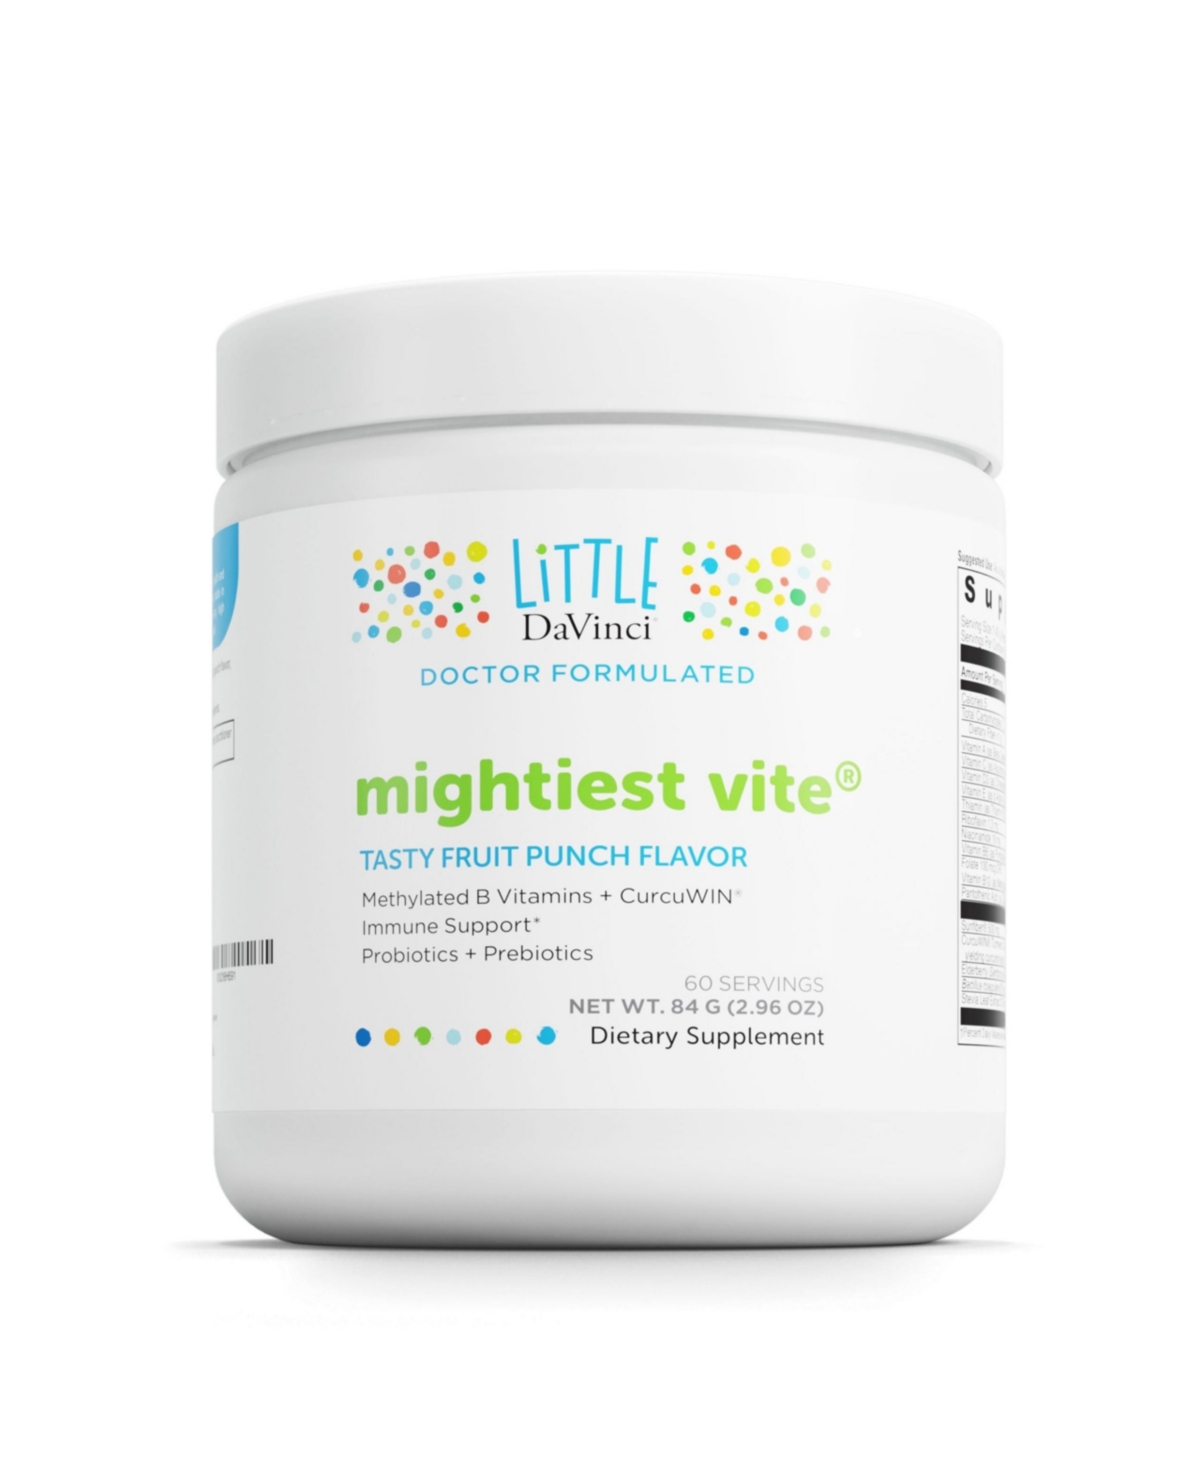 Little DaVinci Mightiest Vite - With Probiotics and Prebiotics - Helps Immune System, Digestive Health, Gut Health and Healthy Br